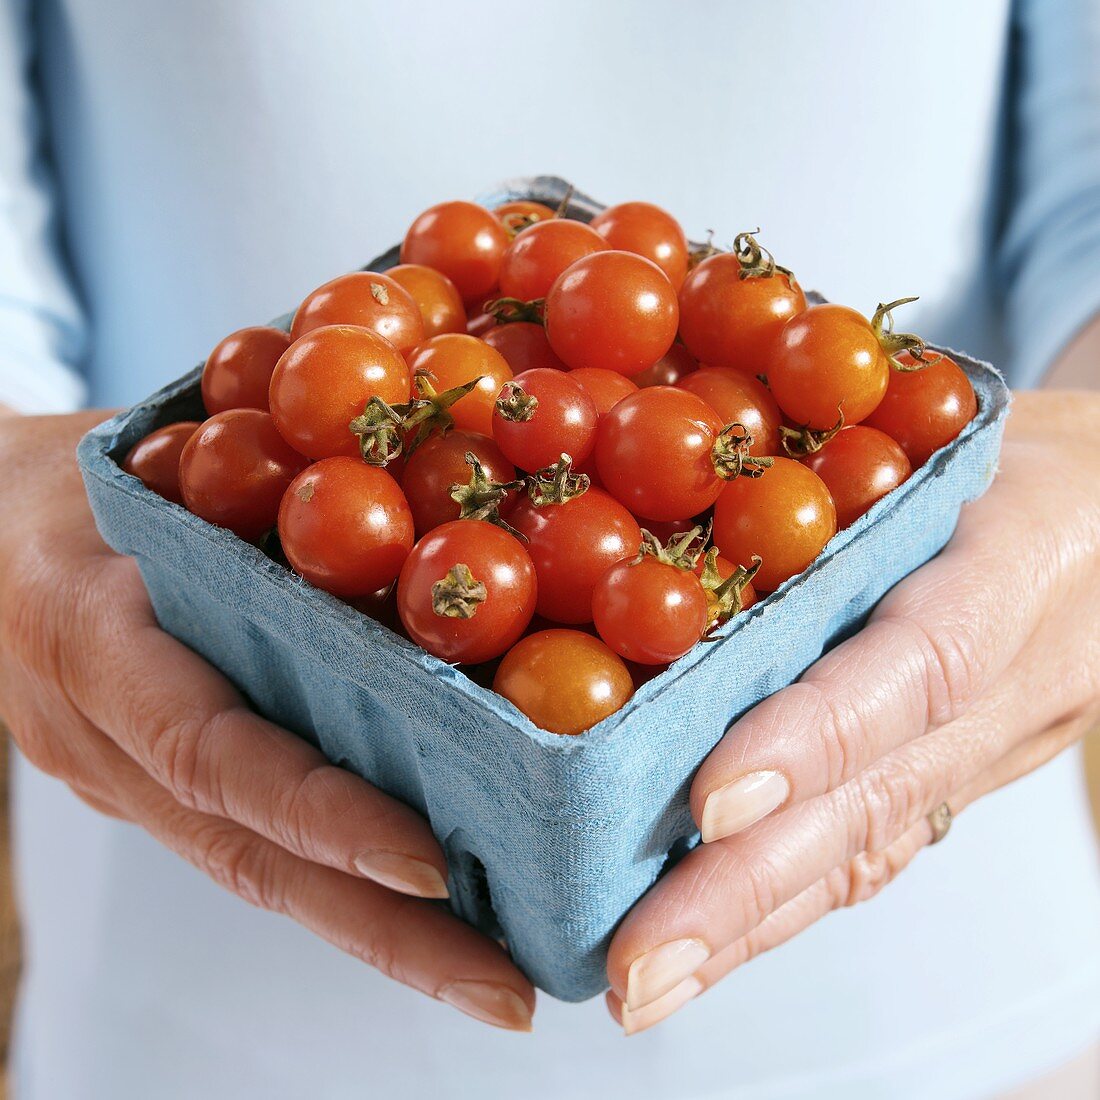 Hands Holding a Container of Grape Tomatoes